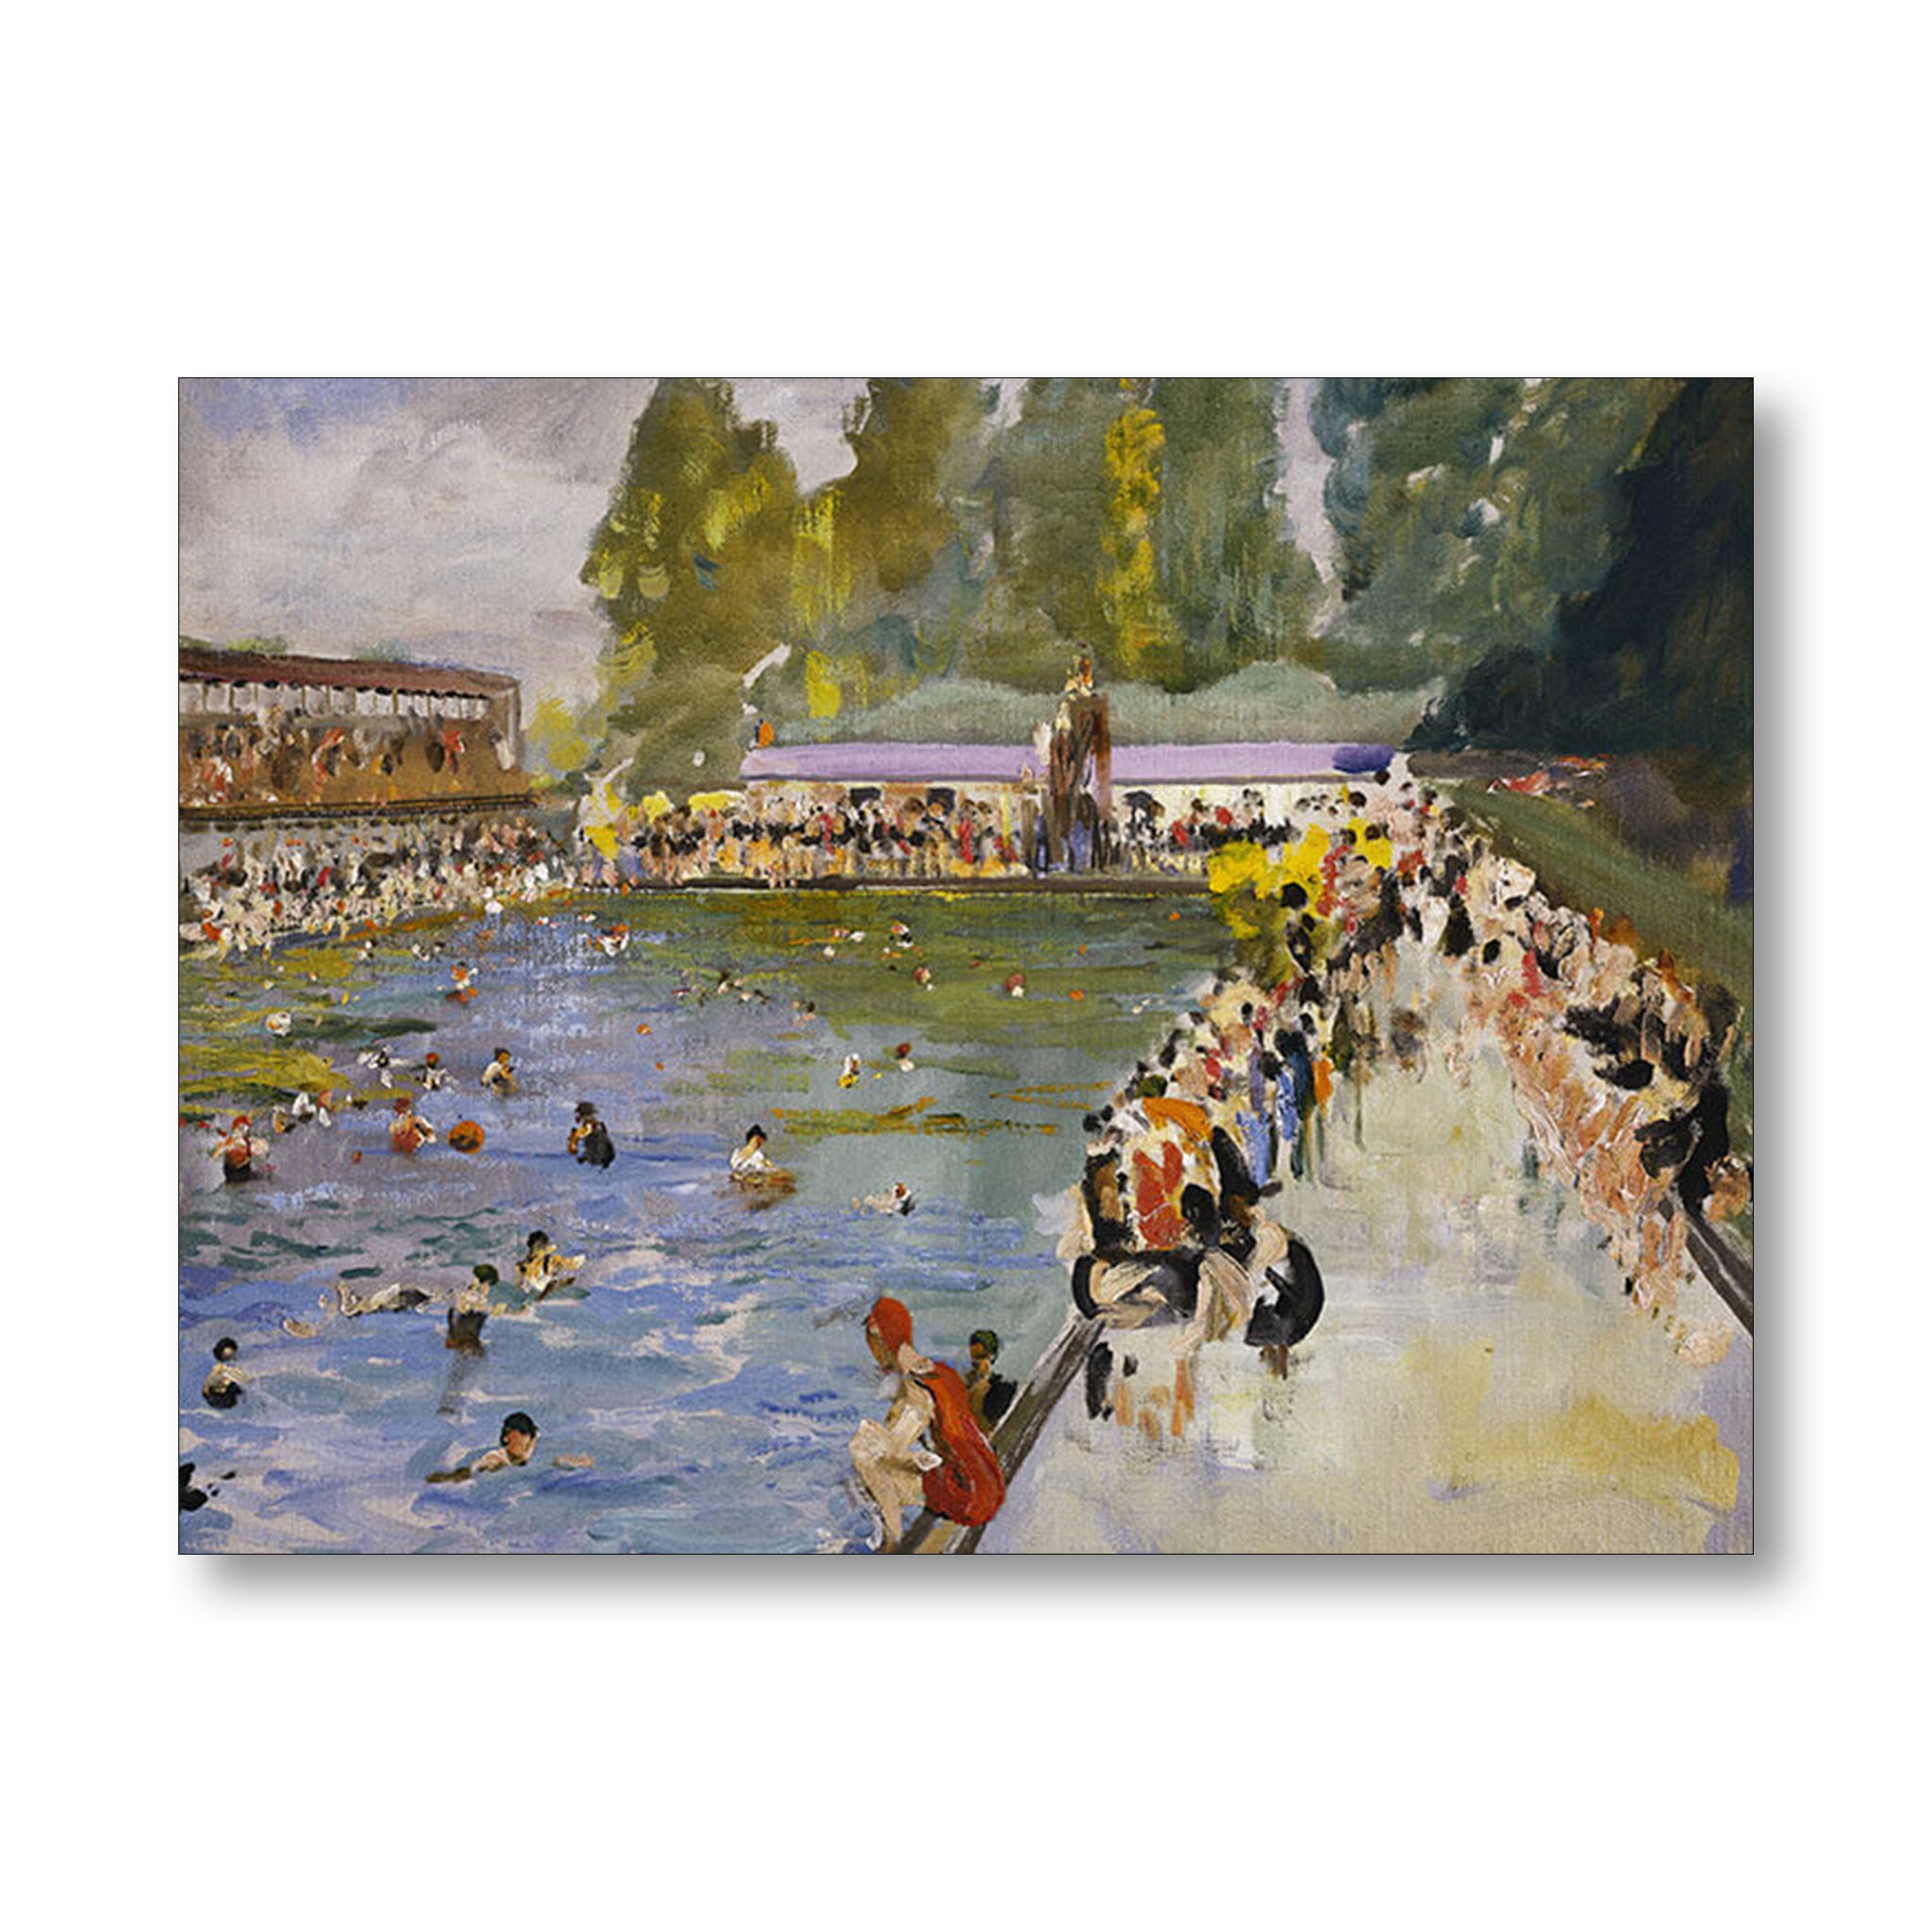 Greeting card of Chiswick Baths 1929 by John Lavery